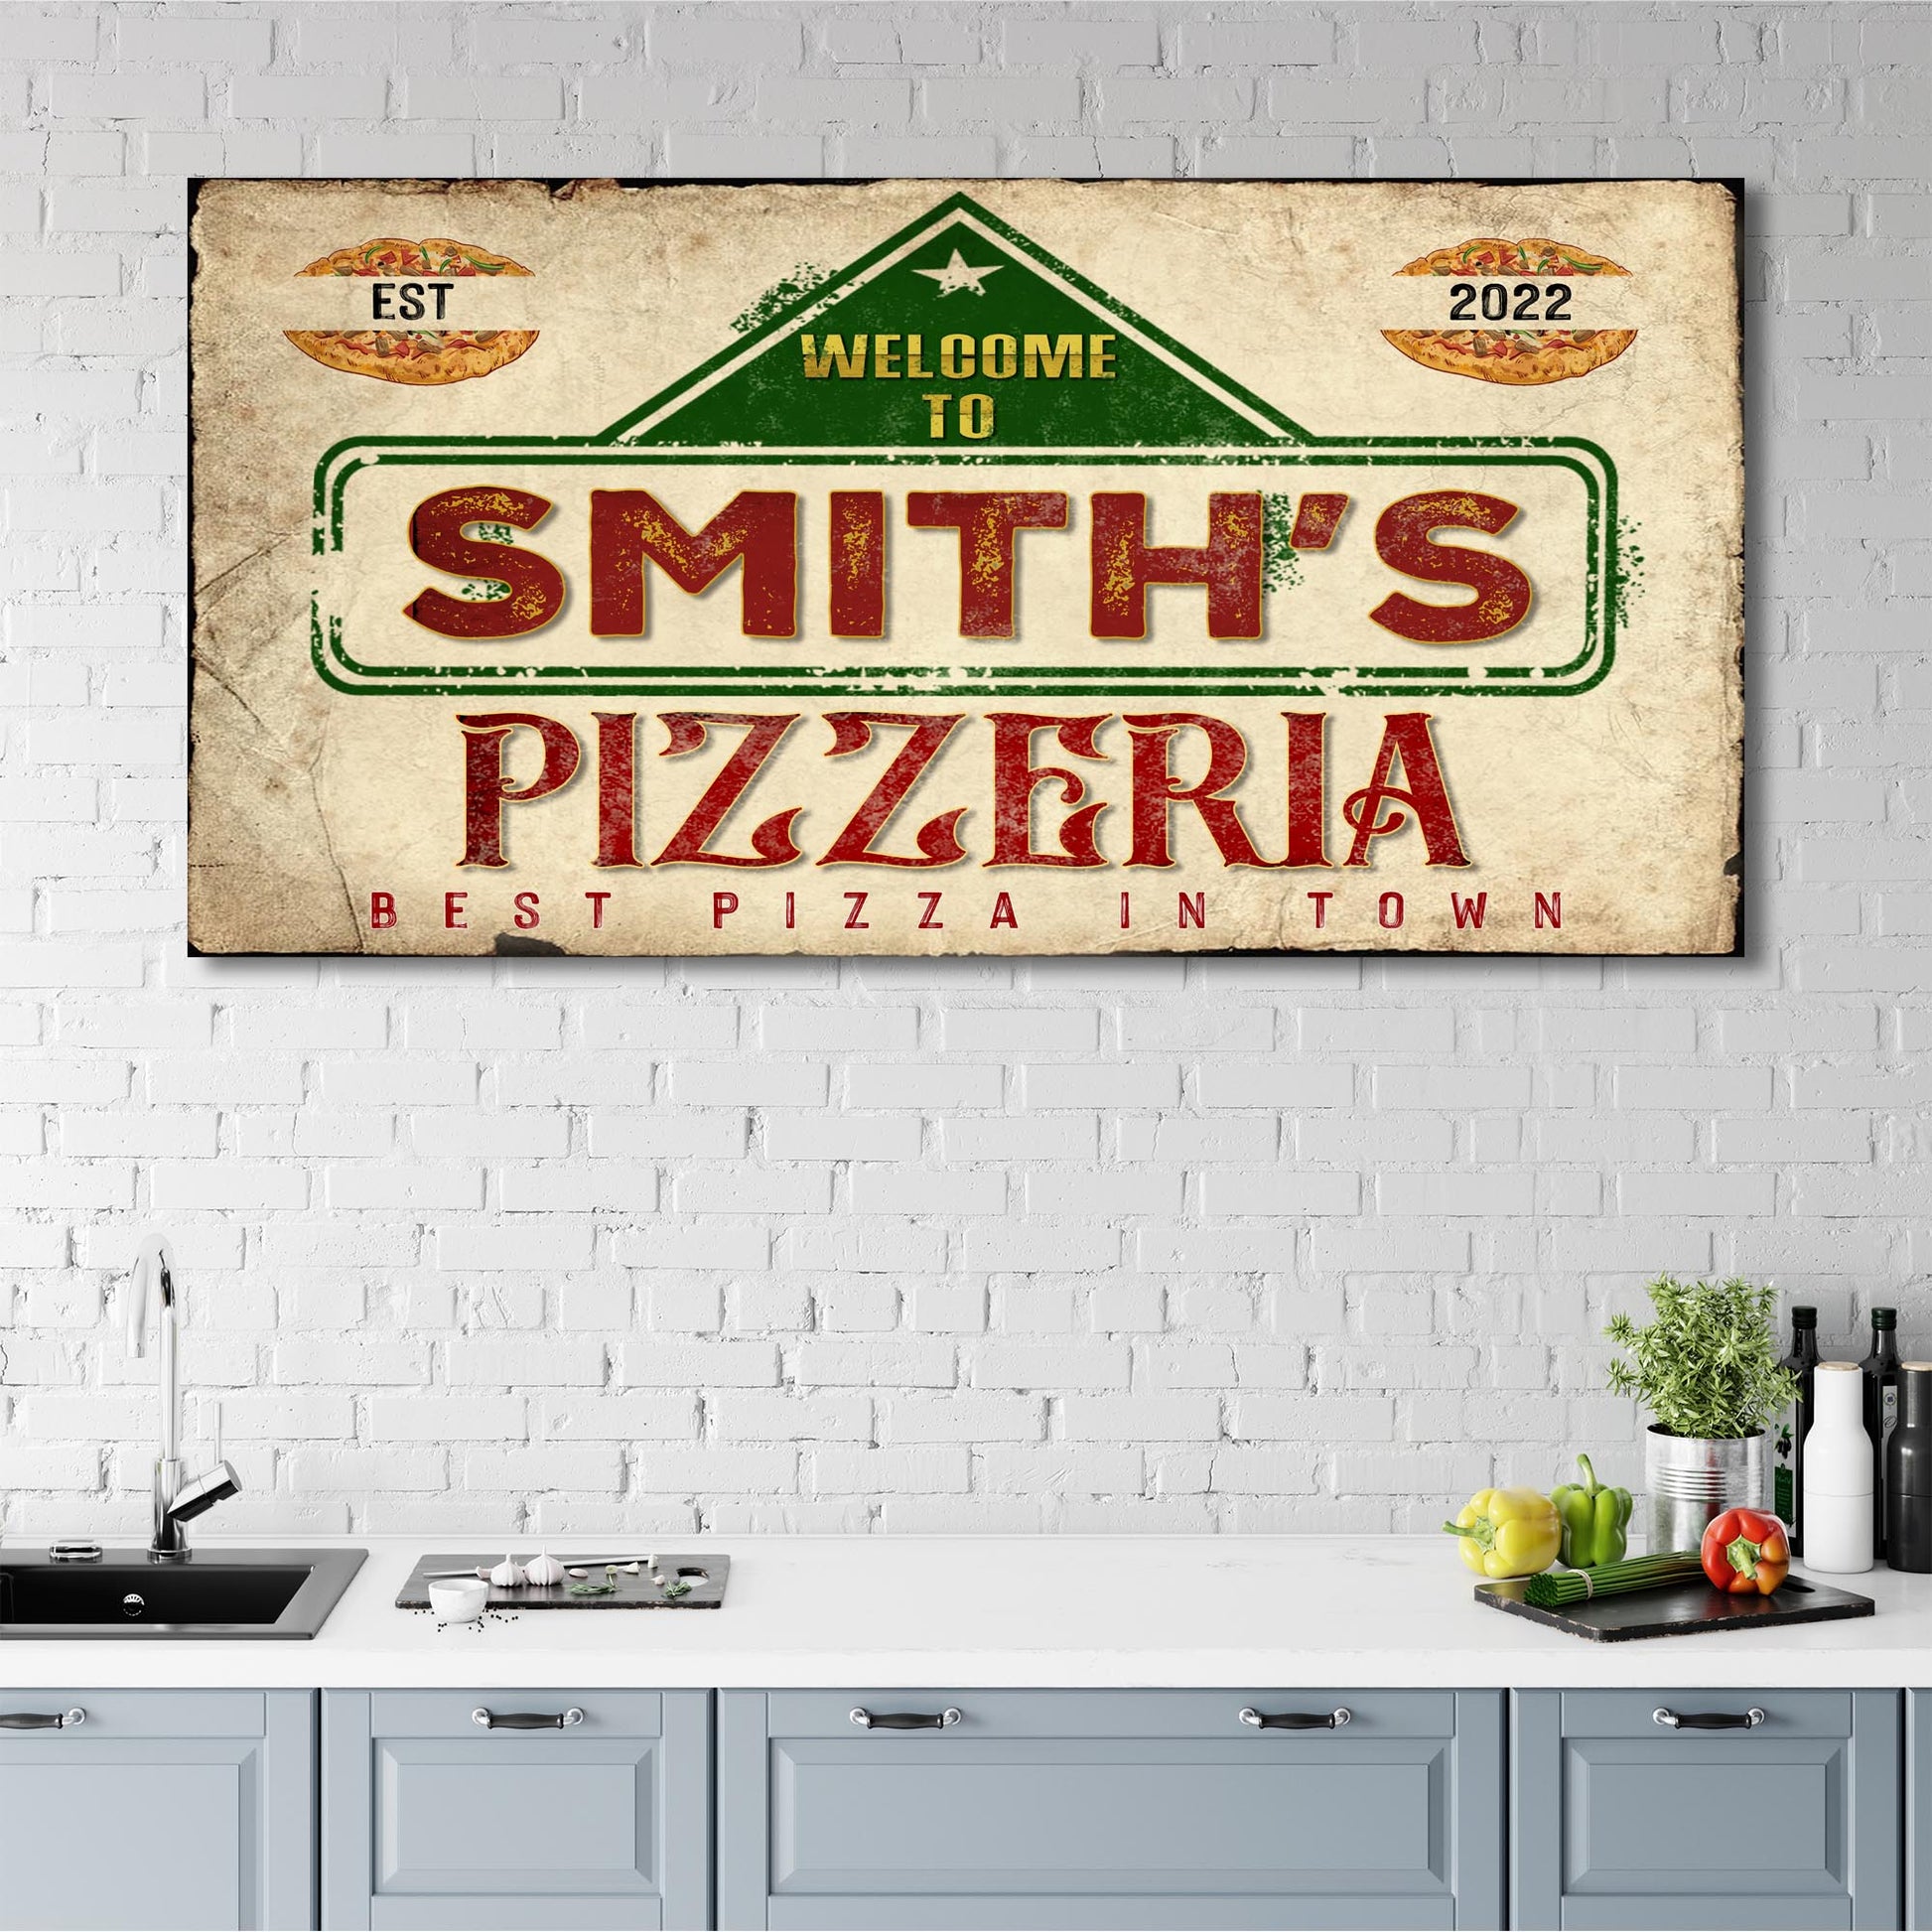 Best Pizza In Town Pizzeria Sign II | Customizable Canvas - Image by Tailored Canvases